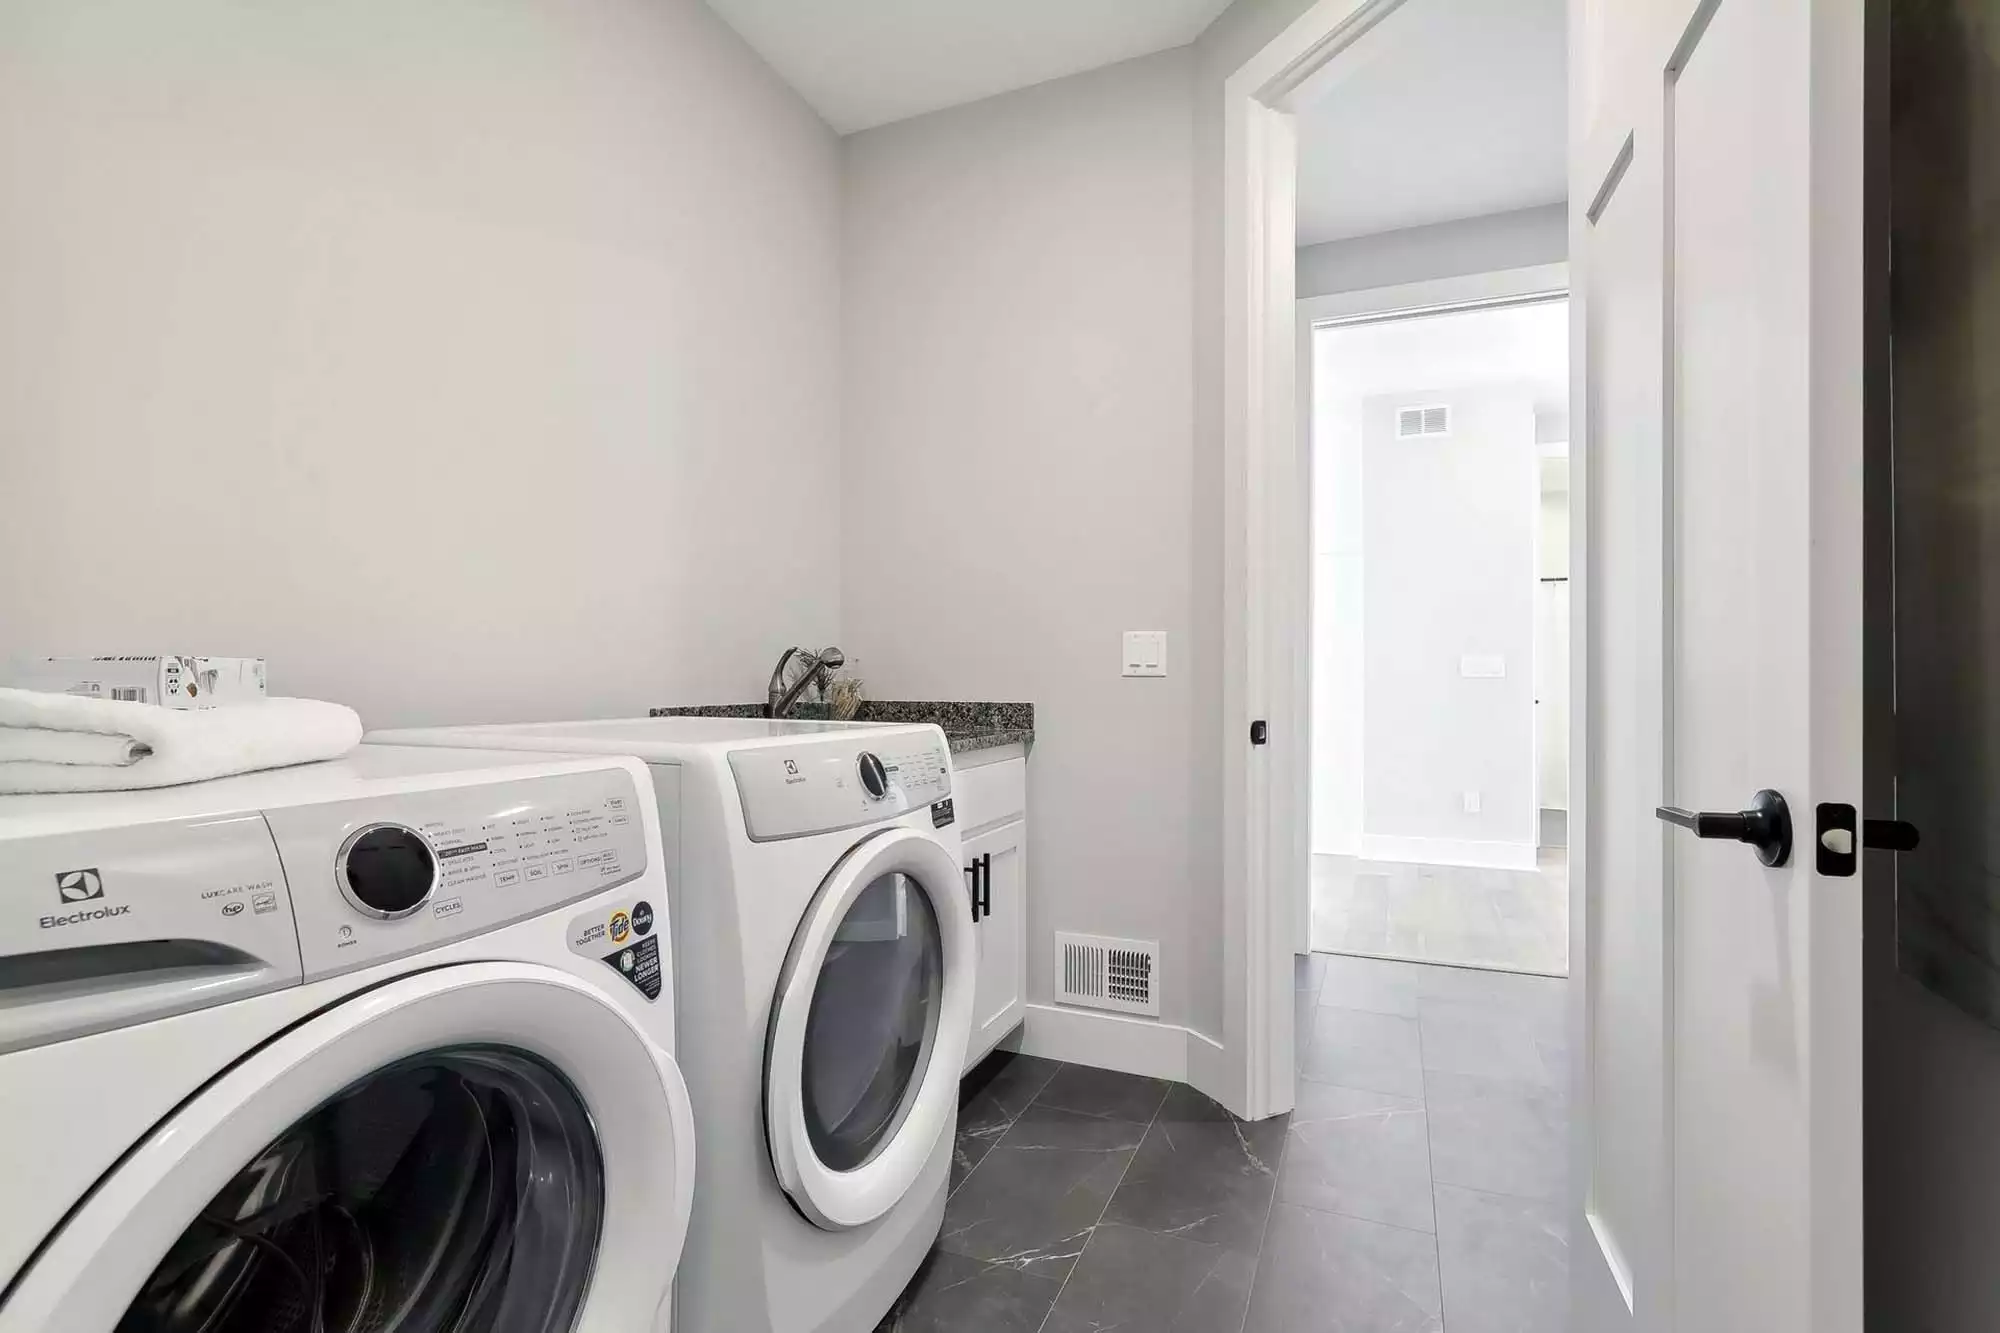 Laundry room with wide accessible entry doors